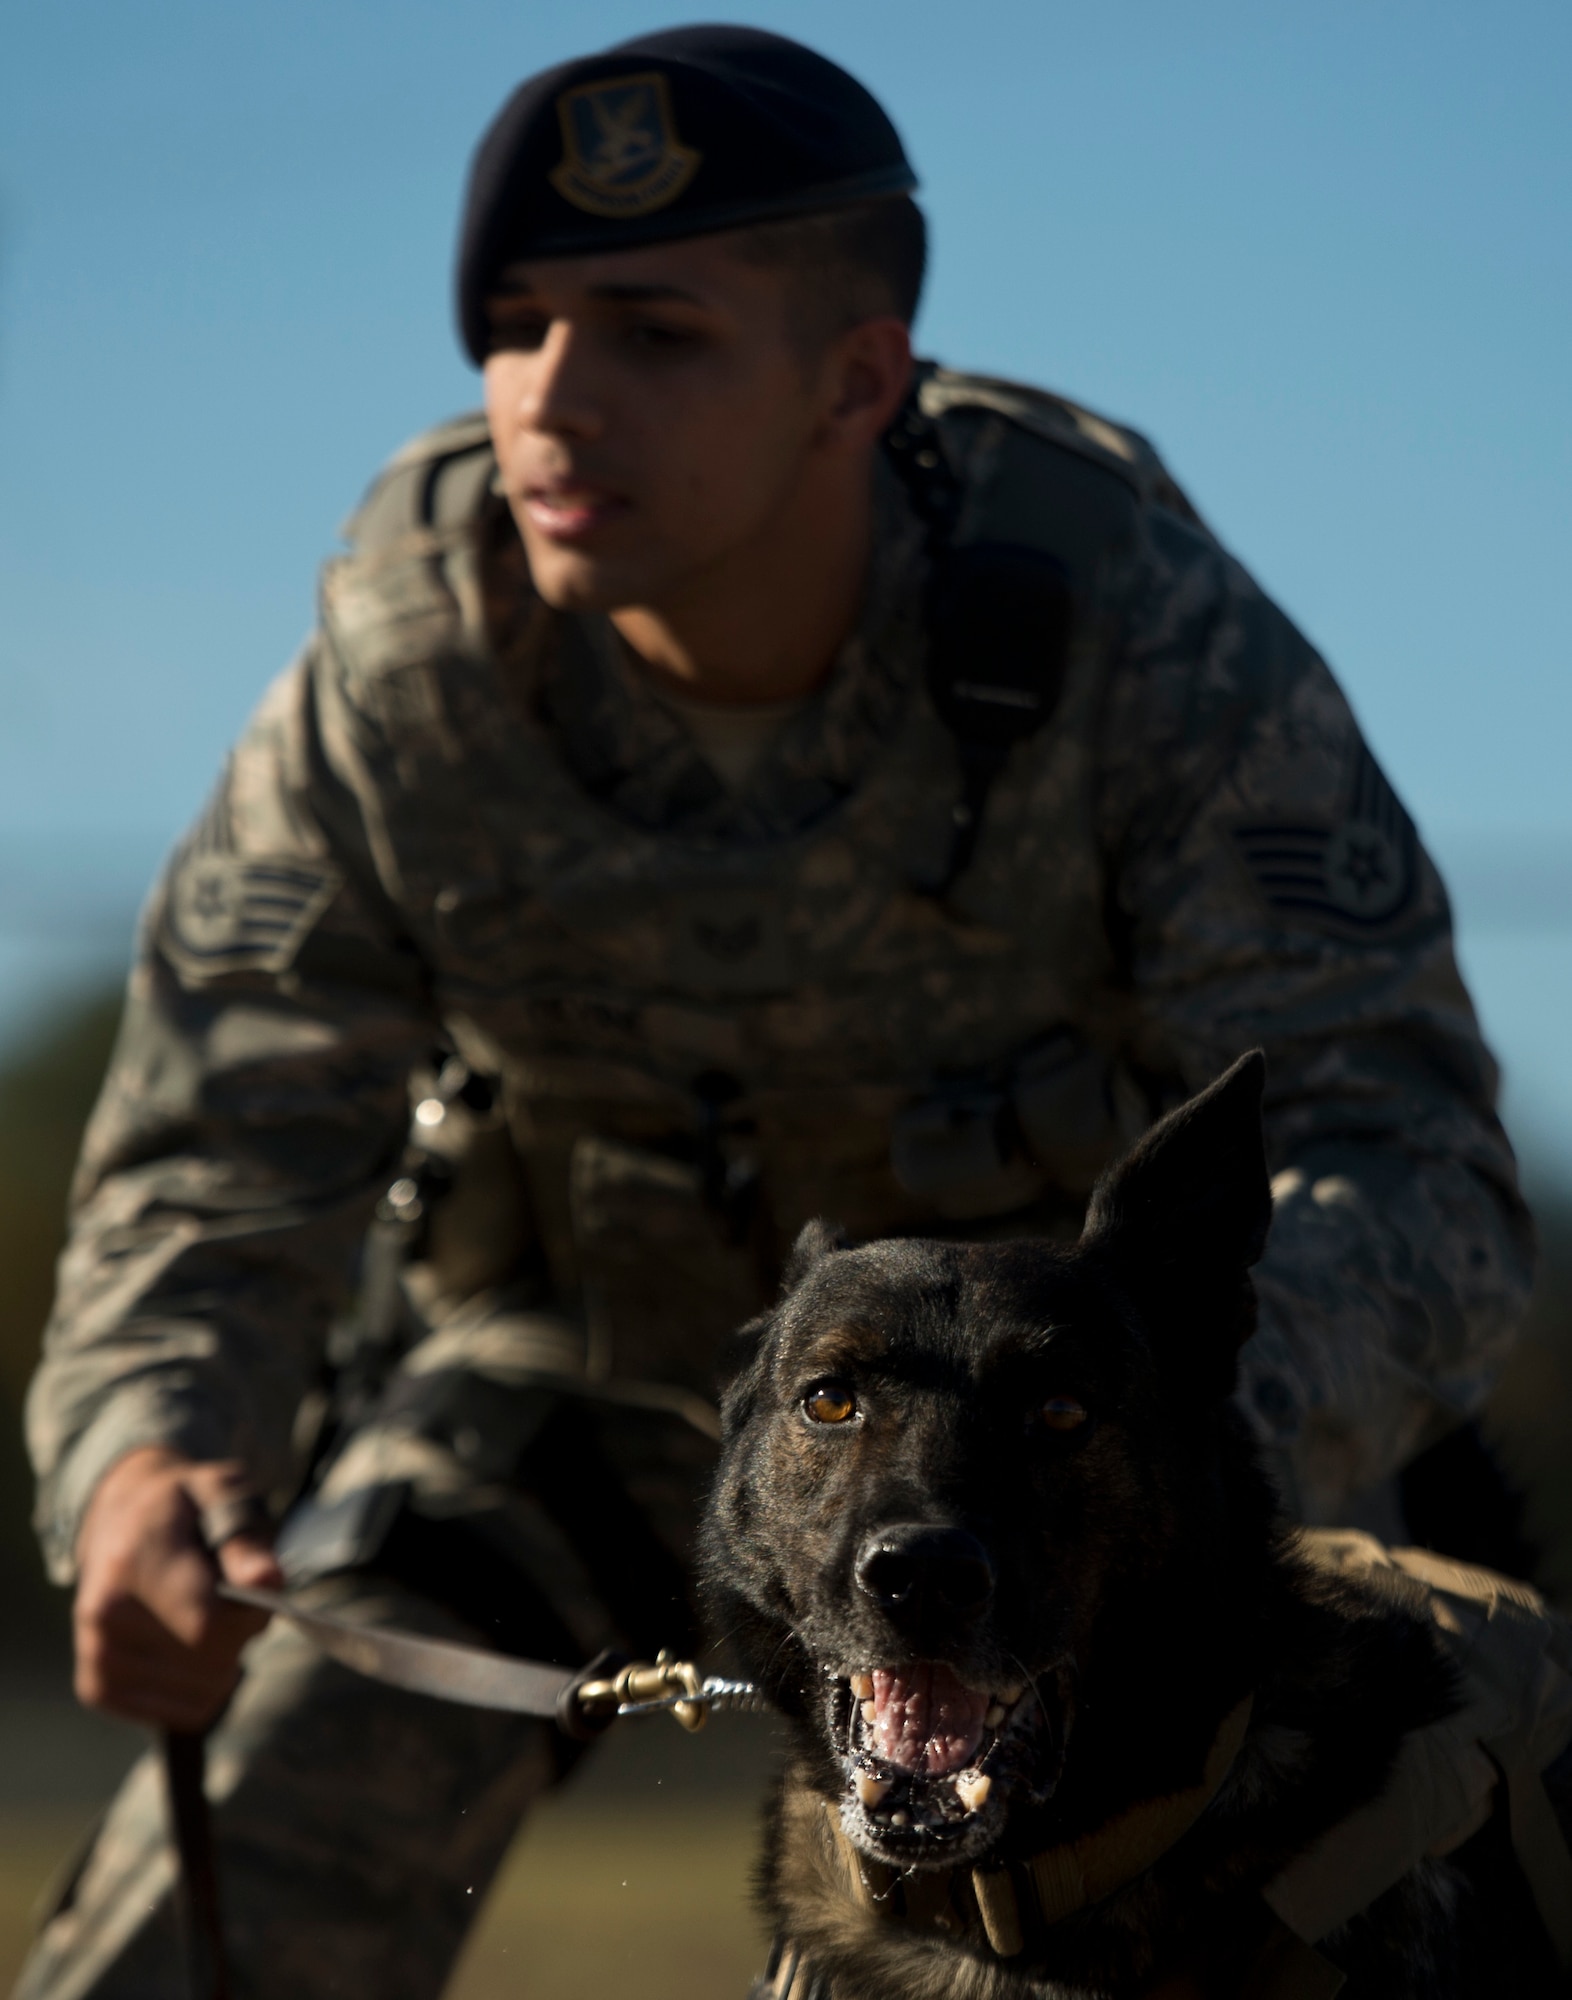 Staff Sgt. Mark Devine, a military working dog handler from the 802nd Security Forces Squadron, holds JJany during a morning exercise training session at Joint Base San Antonio-Lackland. Devine and military working dog handlers assigned to JBSA-Lackland fulfill daily law enforcement requirements or train to remain mission-ready. (U.S. Air force photo/Staff Sgt. Vernon Young Jr.)